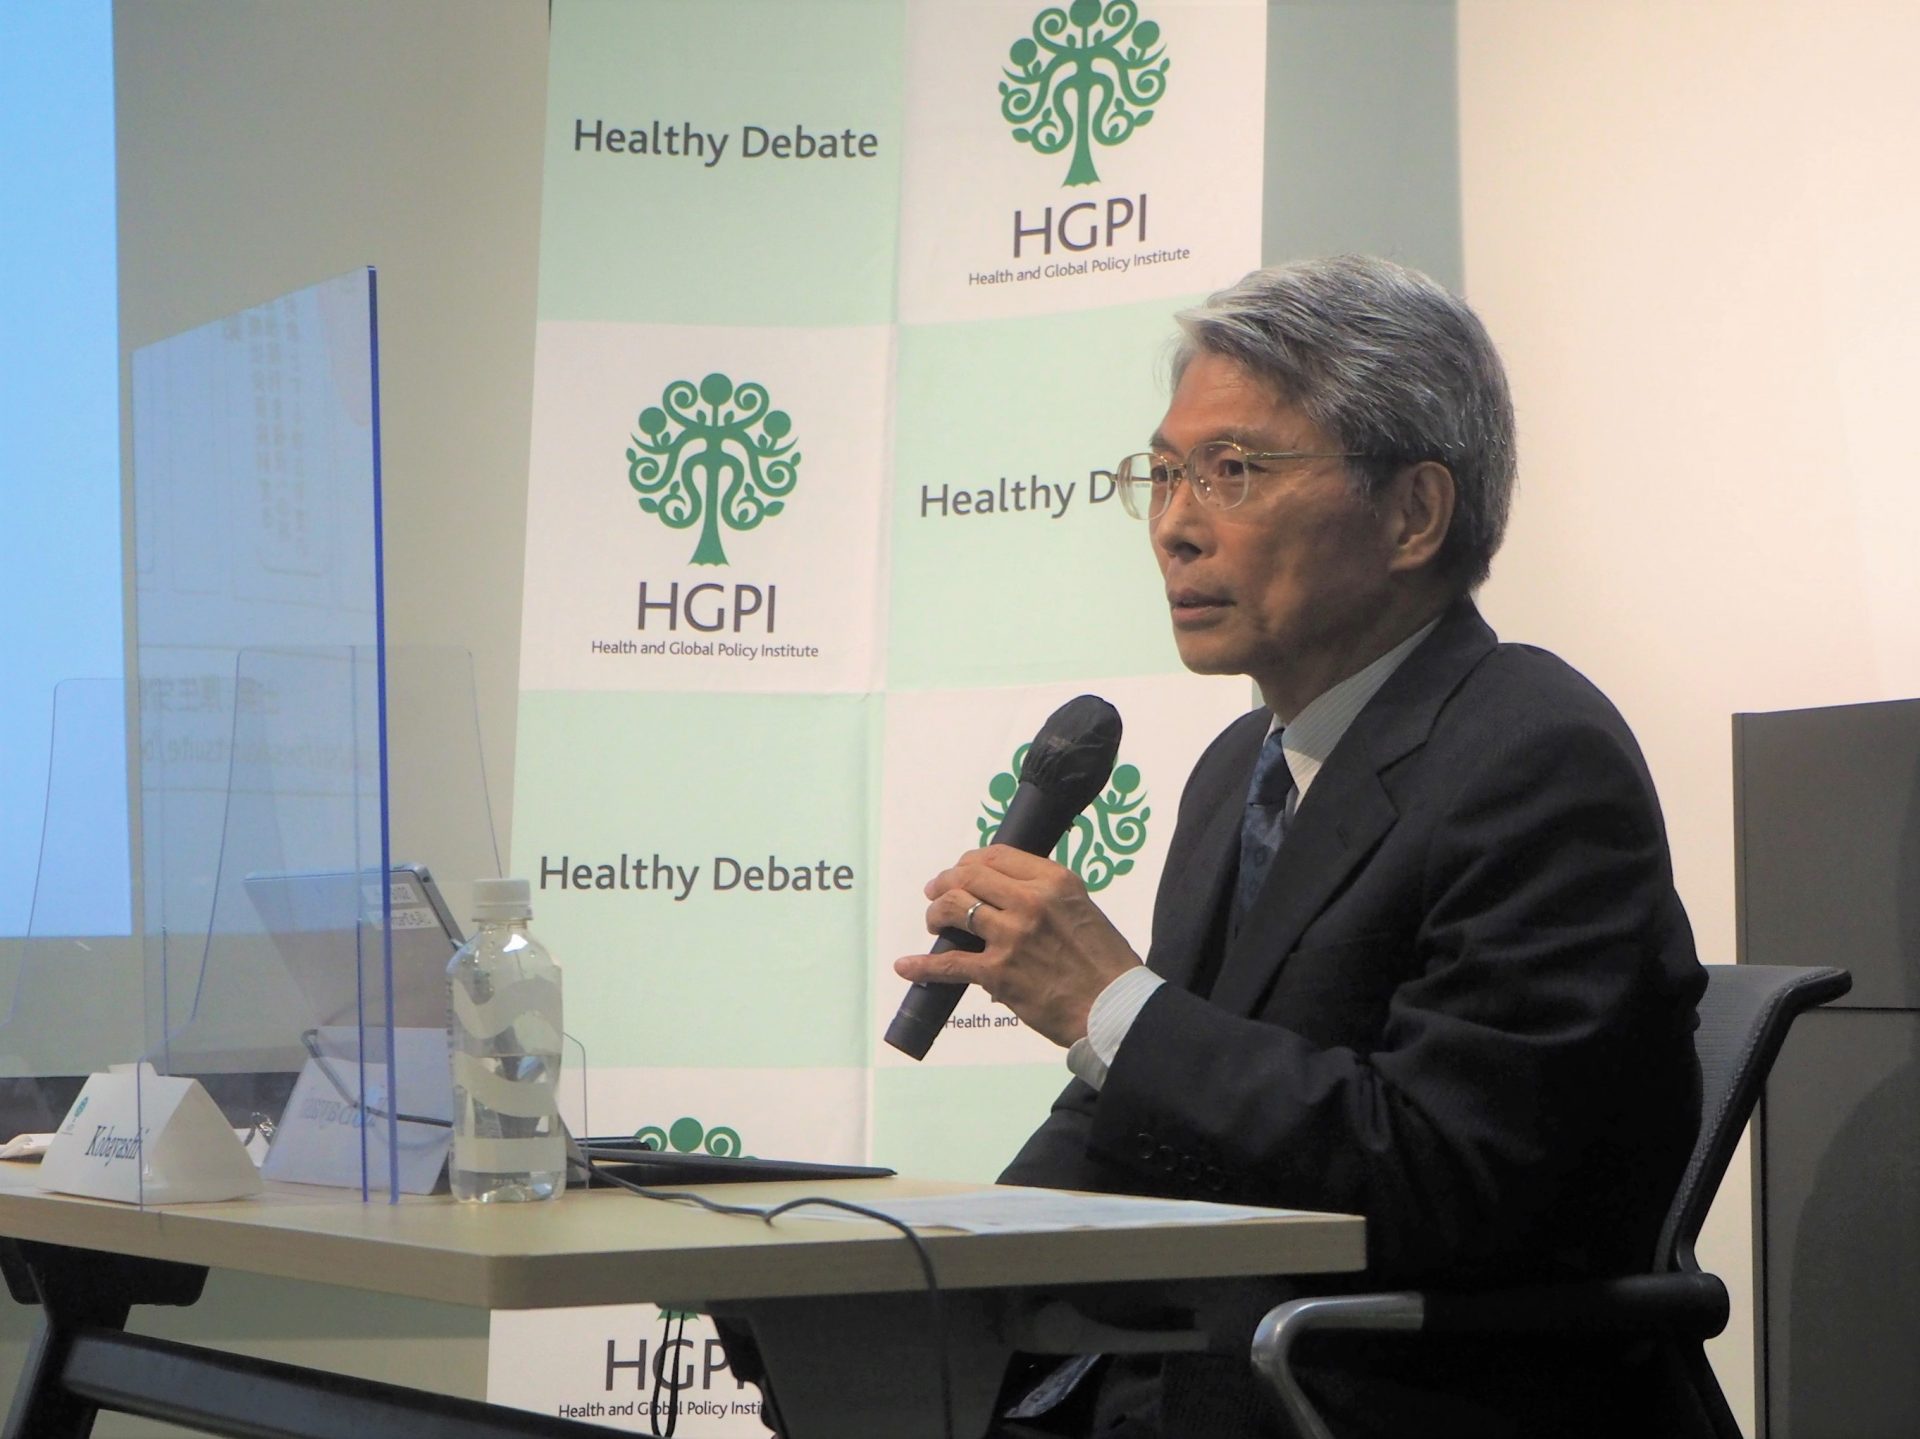 [Event Report] The 11th Semester of Health Policy Academy, Lecture 2 – The history of Health Policy / Health Insurance System (June 23, 2022)